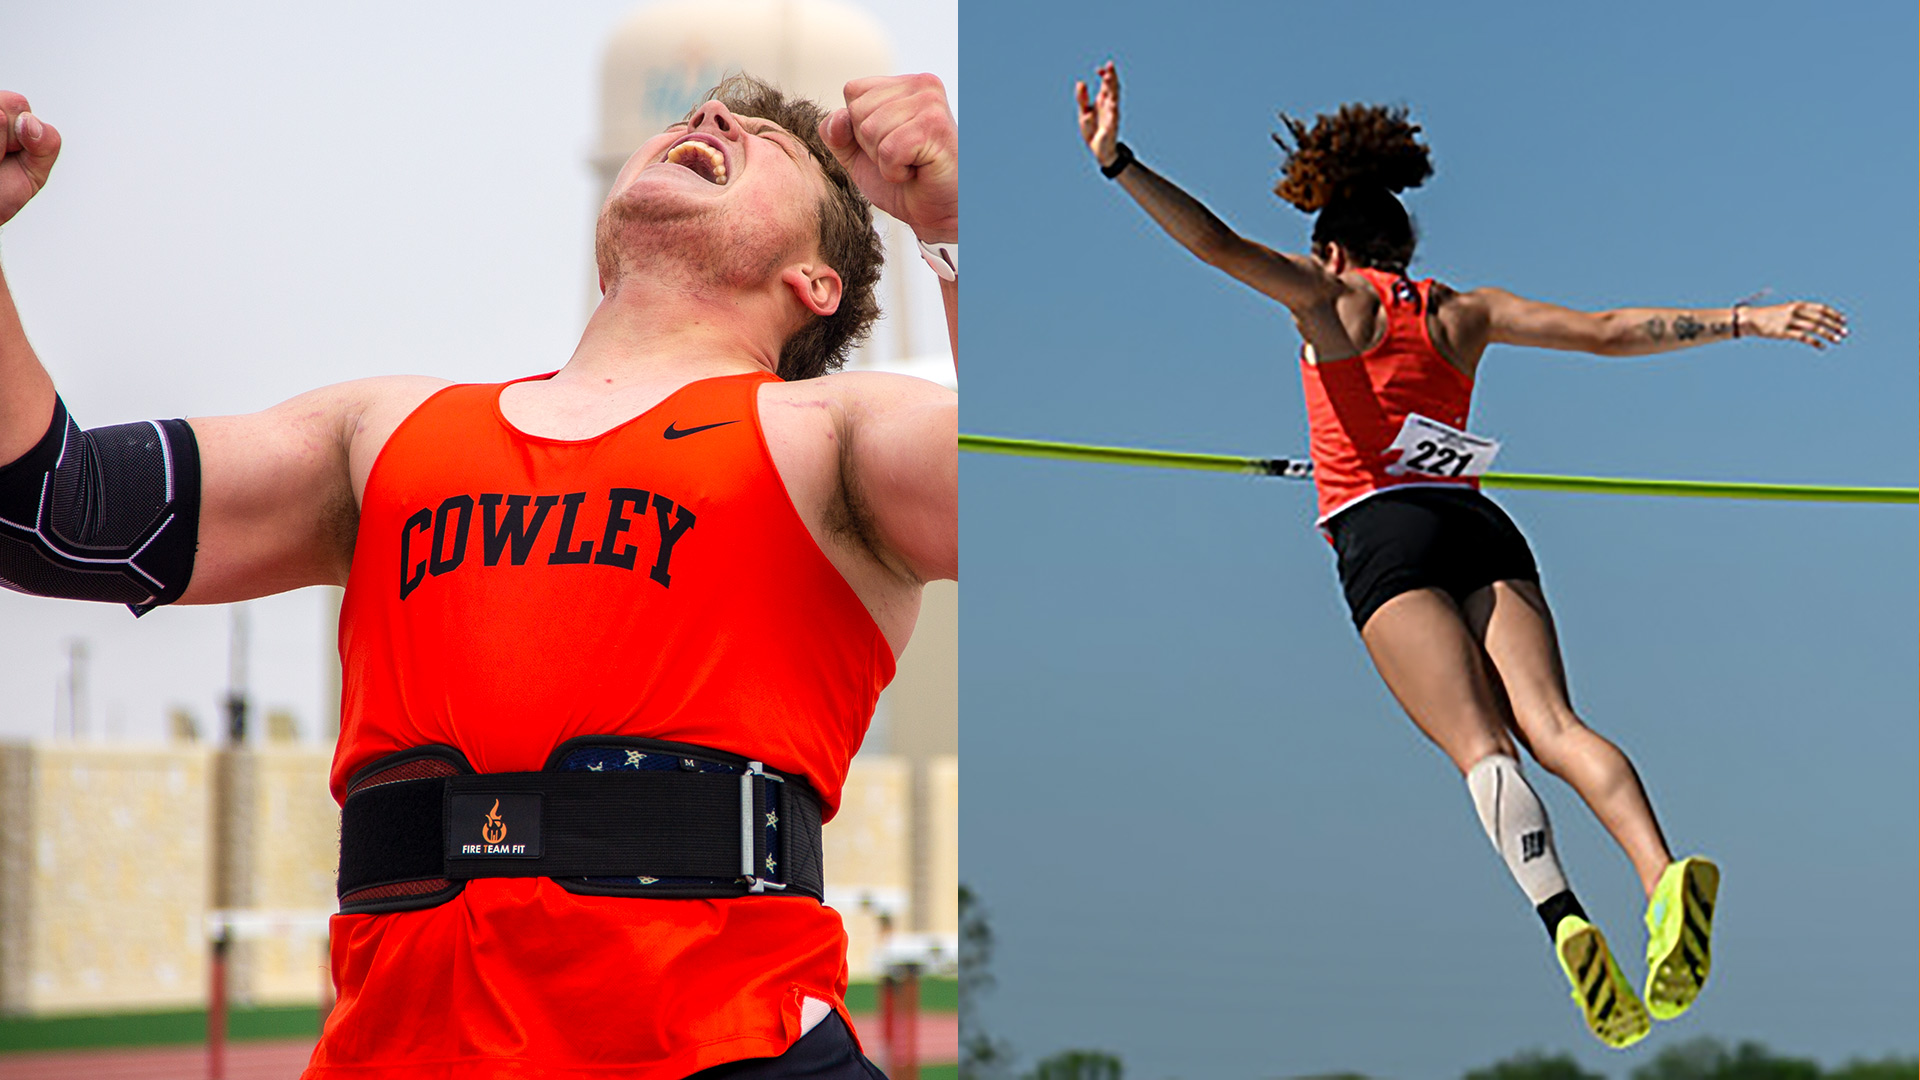 Cowley men?s track and field team places ninth, women 13th at Outdoor National Championships